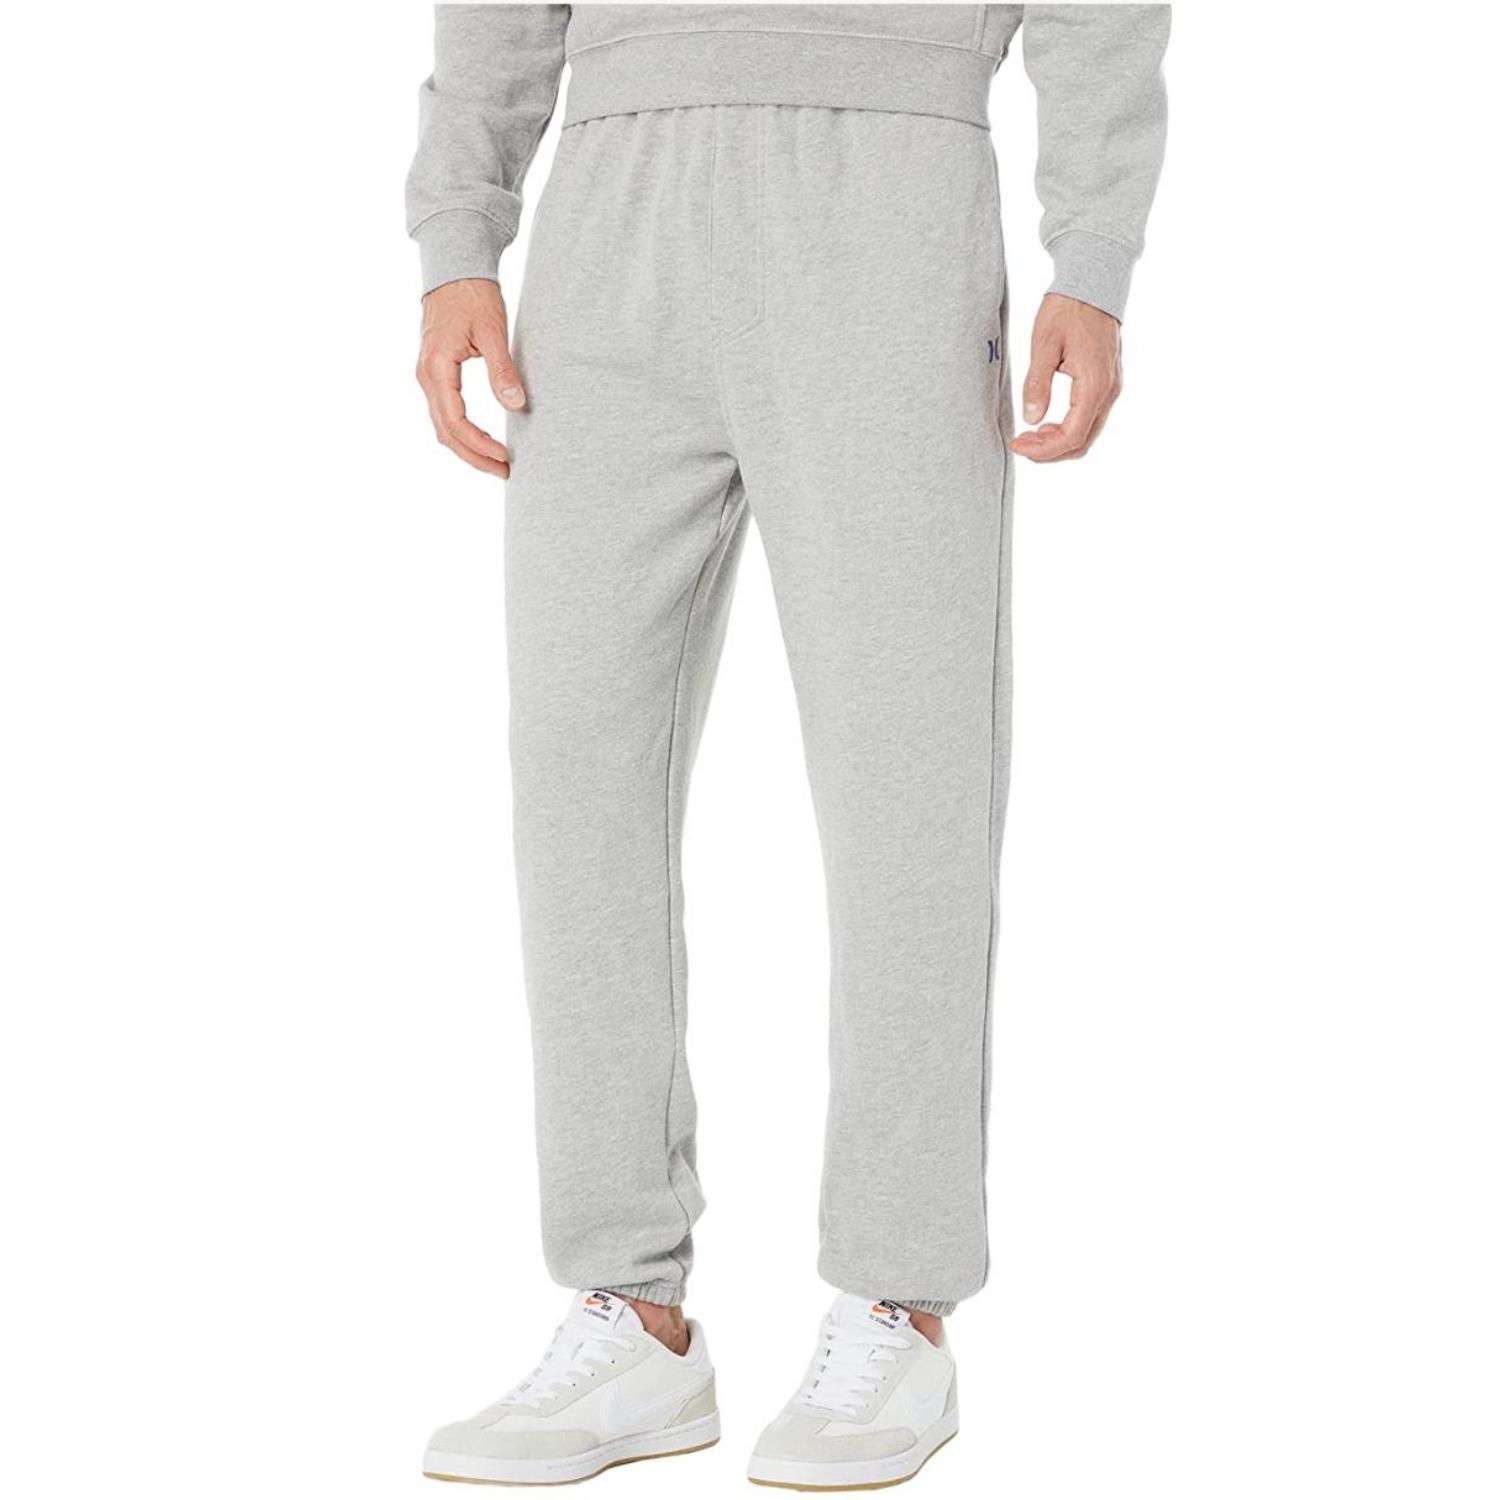 Hurley One And Only Solid Summer Fleece Joggers - Dark Grey Heather - Mens Joggers by Hurley